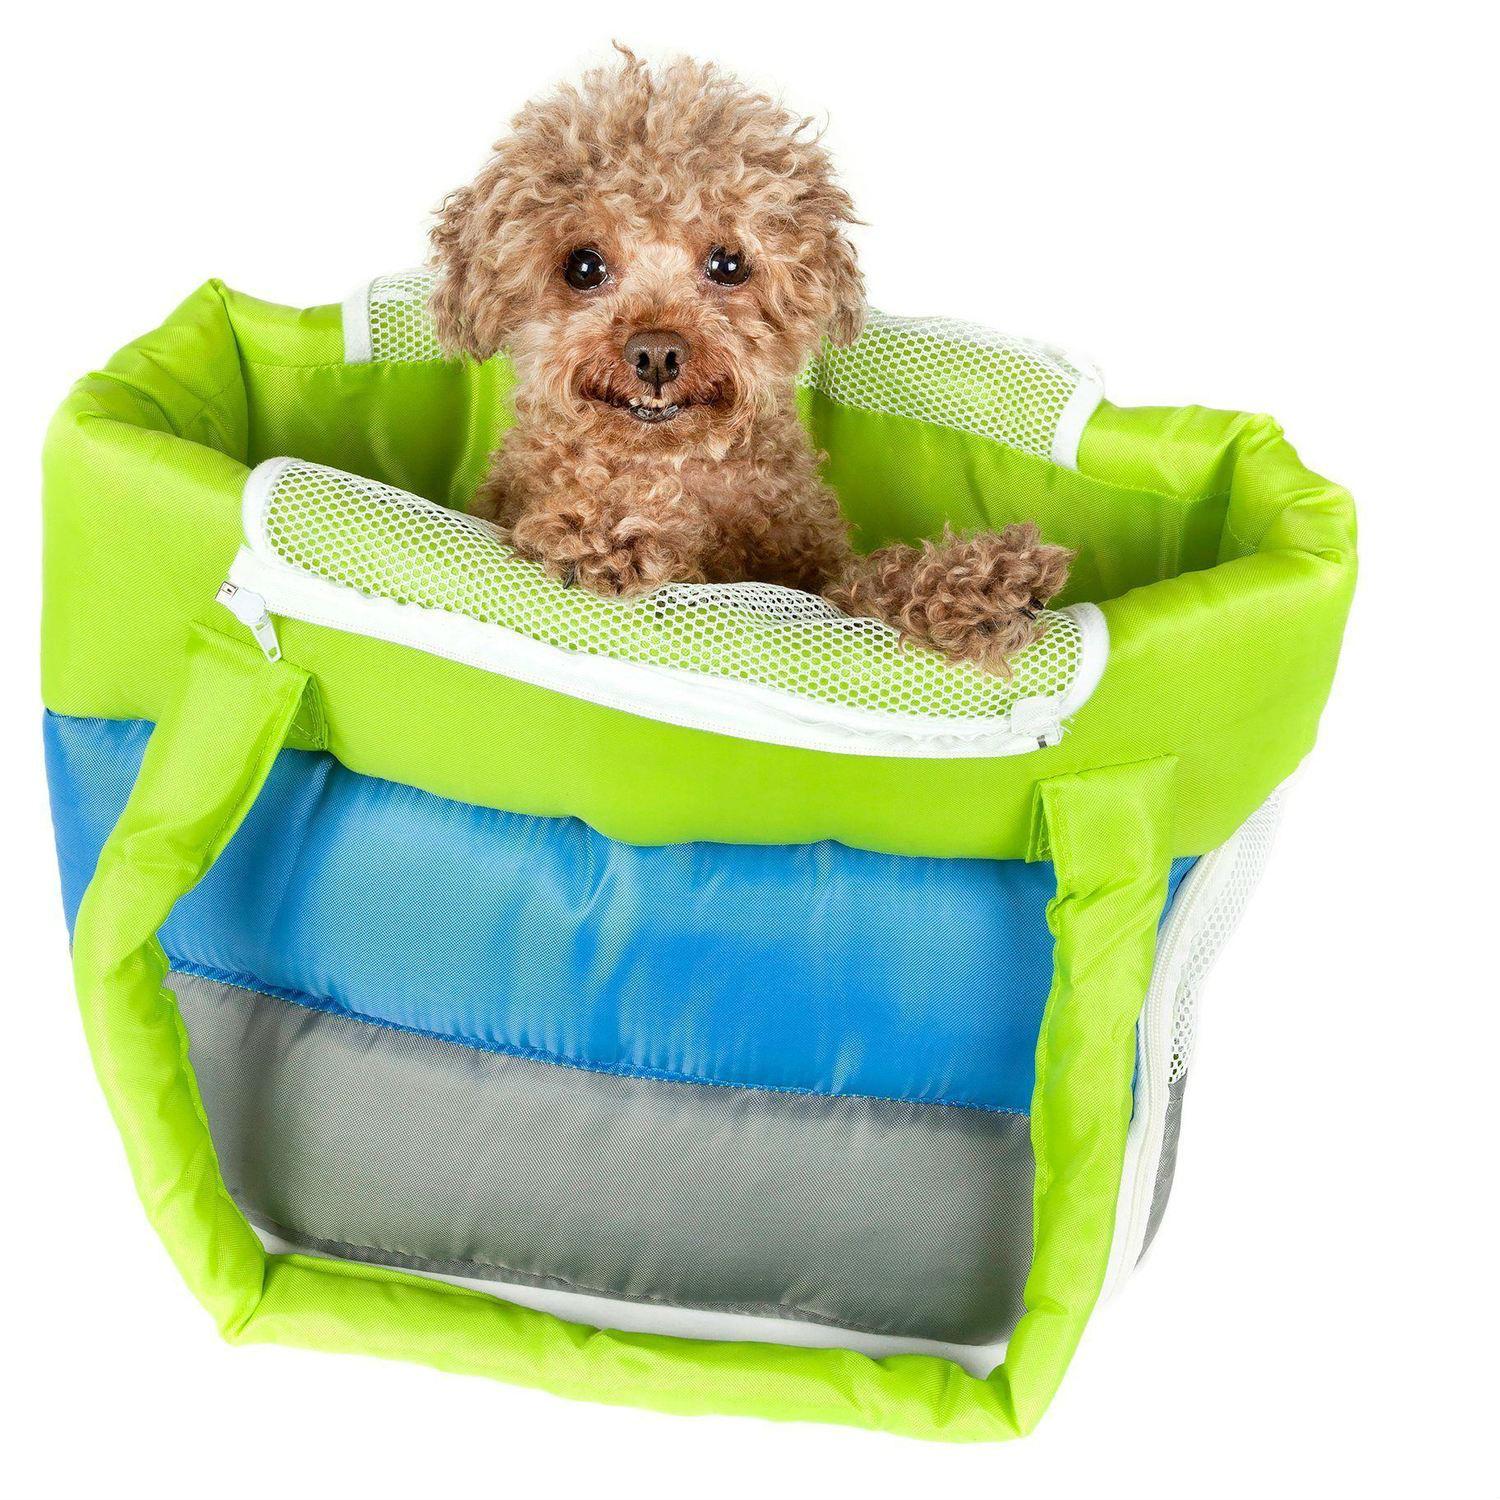 Pet Life Bubble-Poly Tri-Colored Insulated Pet Carrier - Green, Blue, and Gray